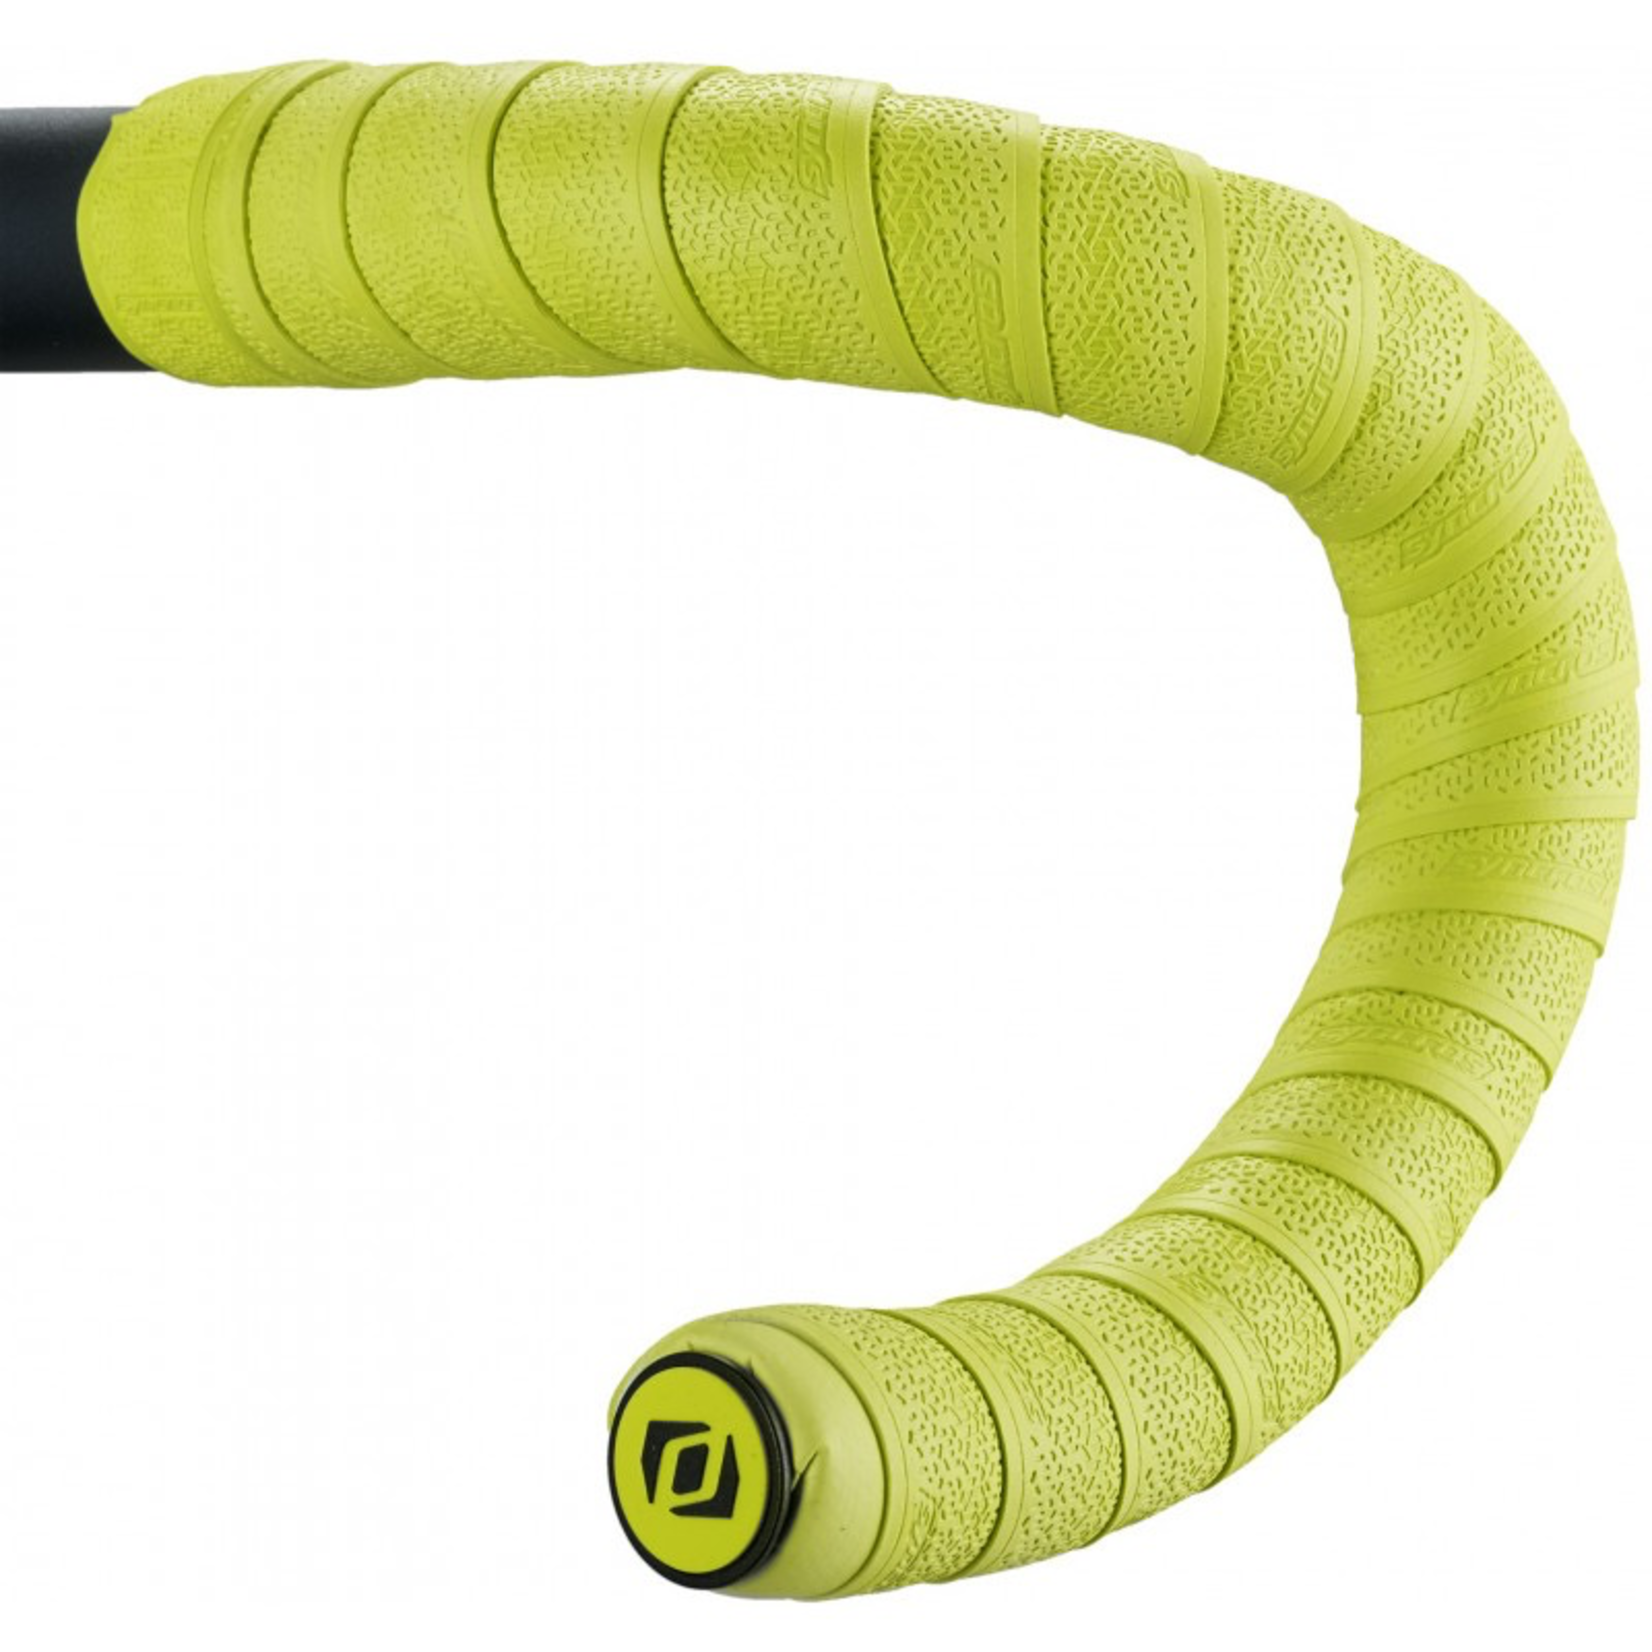 SYNCROS - BAR TAPE SUPER LIGHT - SULPHER YELLOW